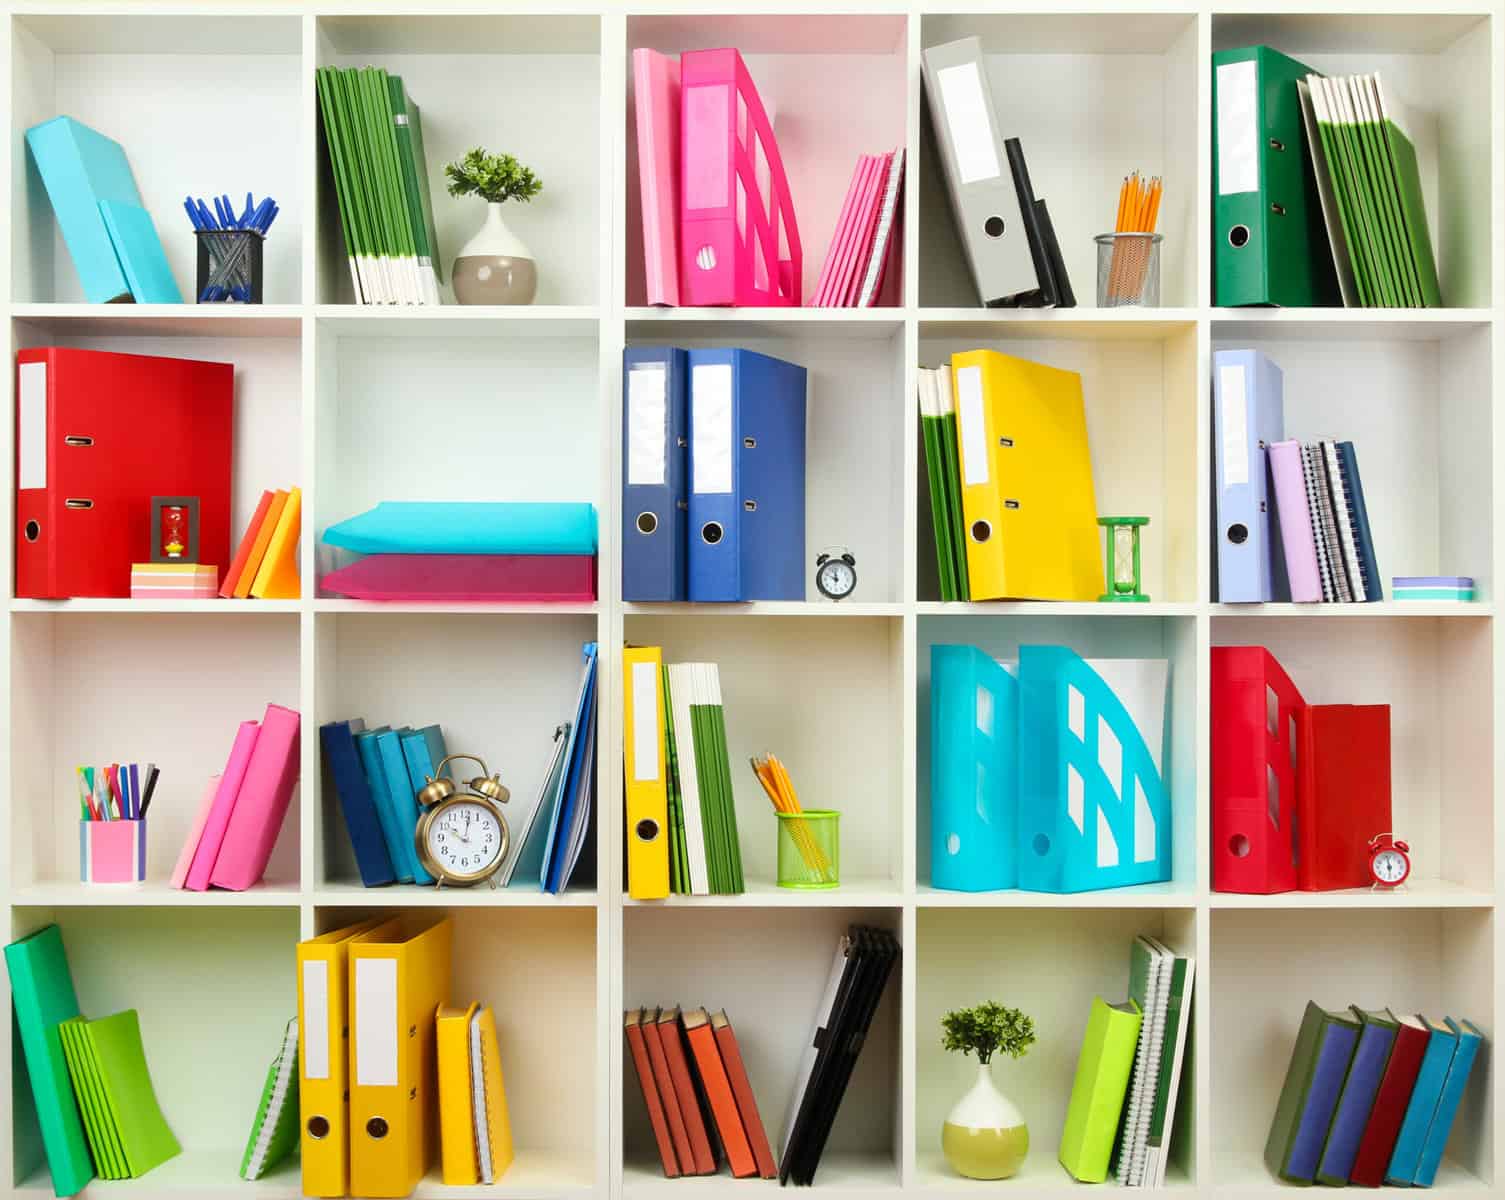 Image of colorful binders on a shelf